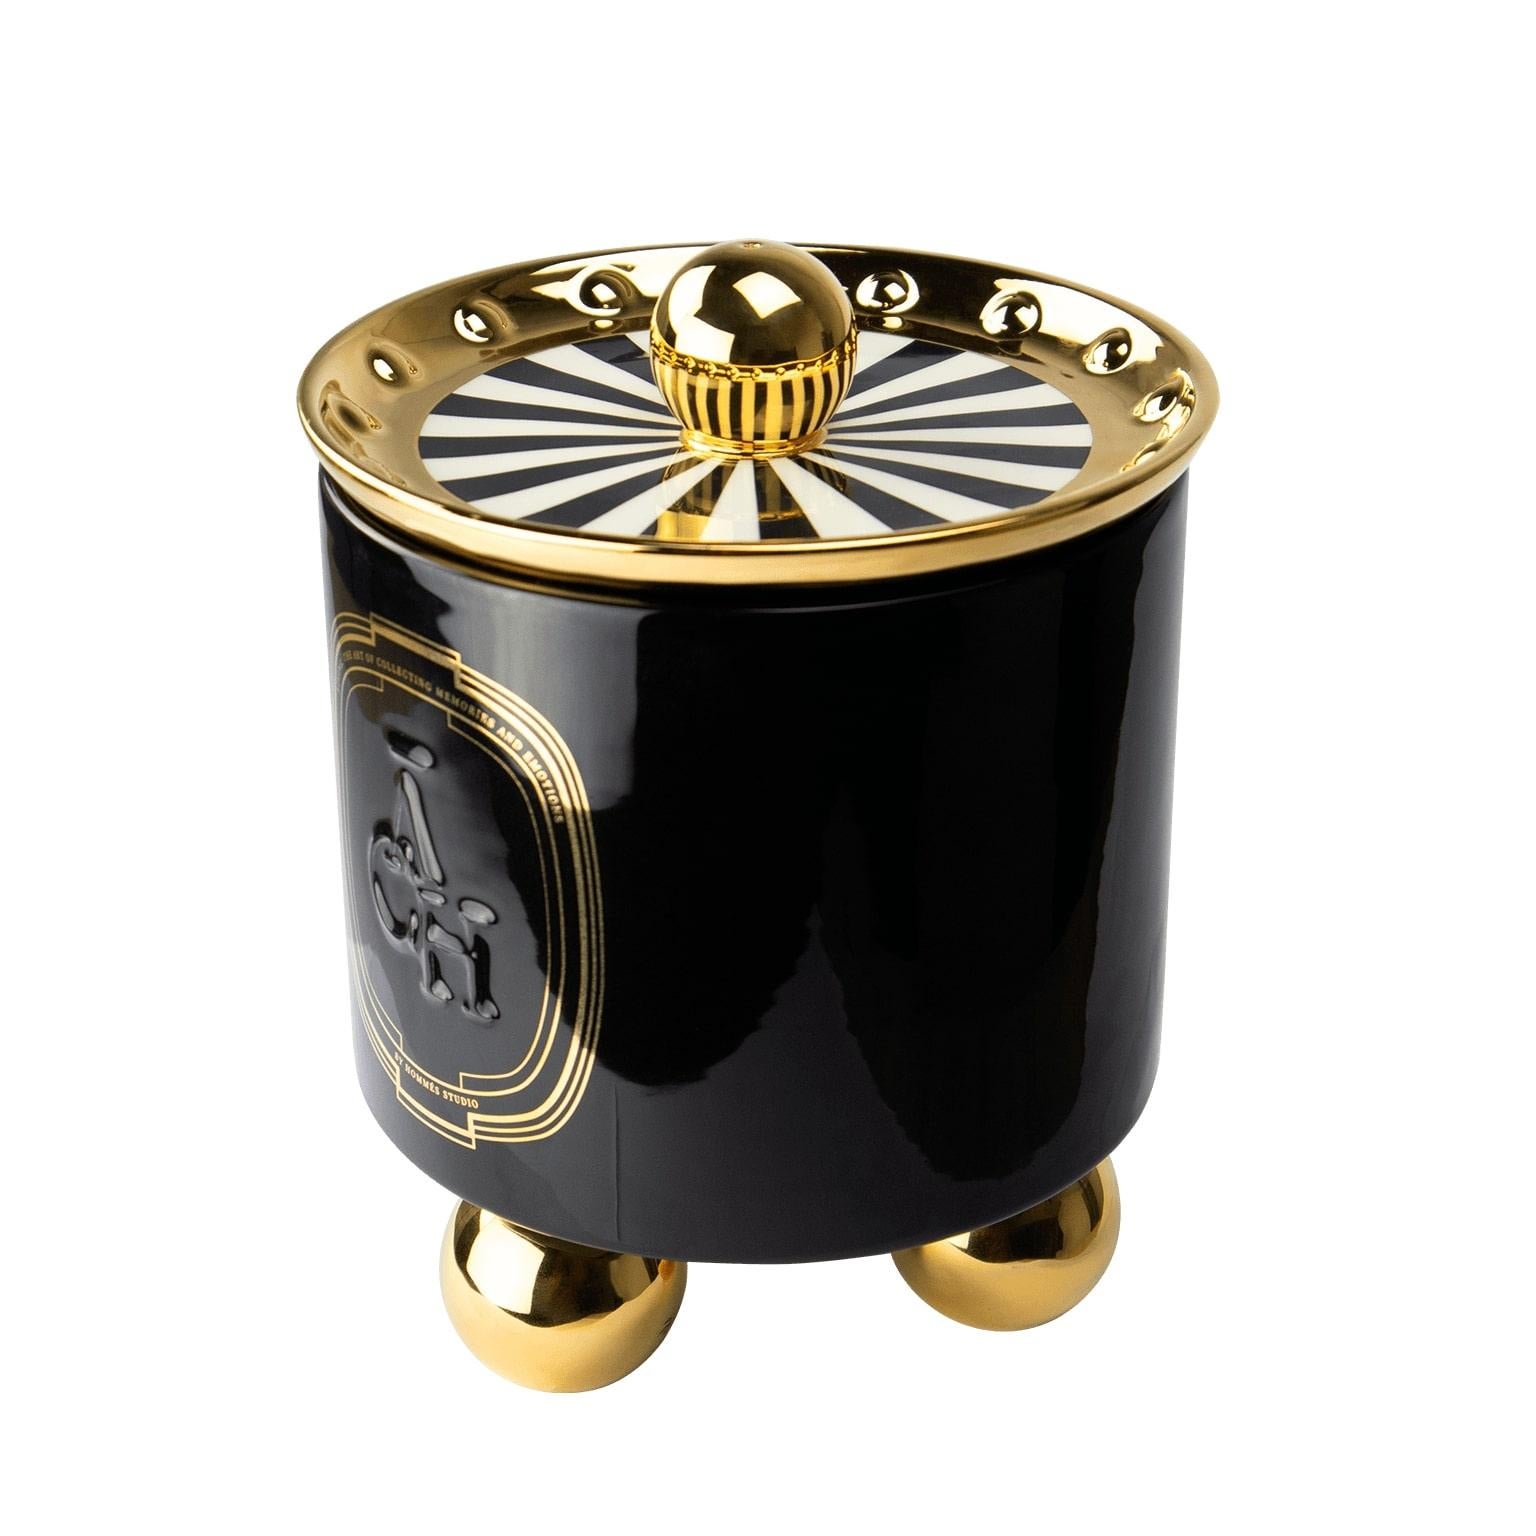 Portuguese Achi Black and Gold Decor Candle, Luxury Ceramic Container Box with Lid